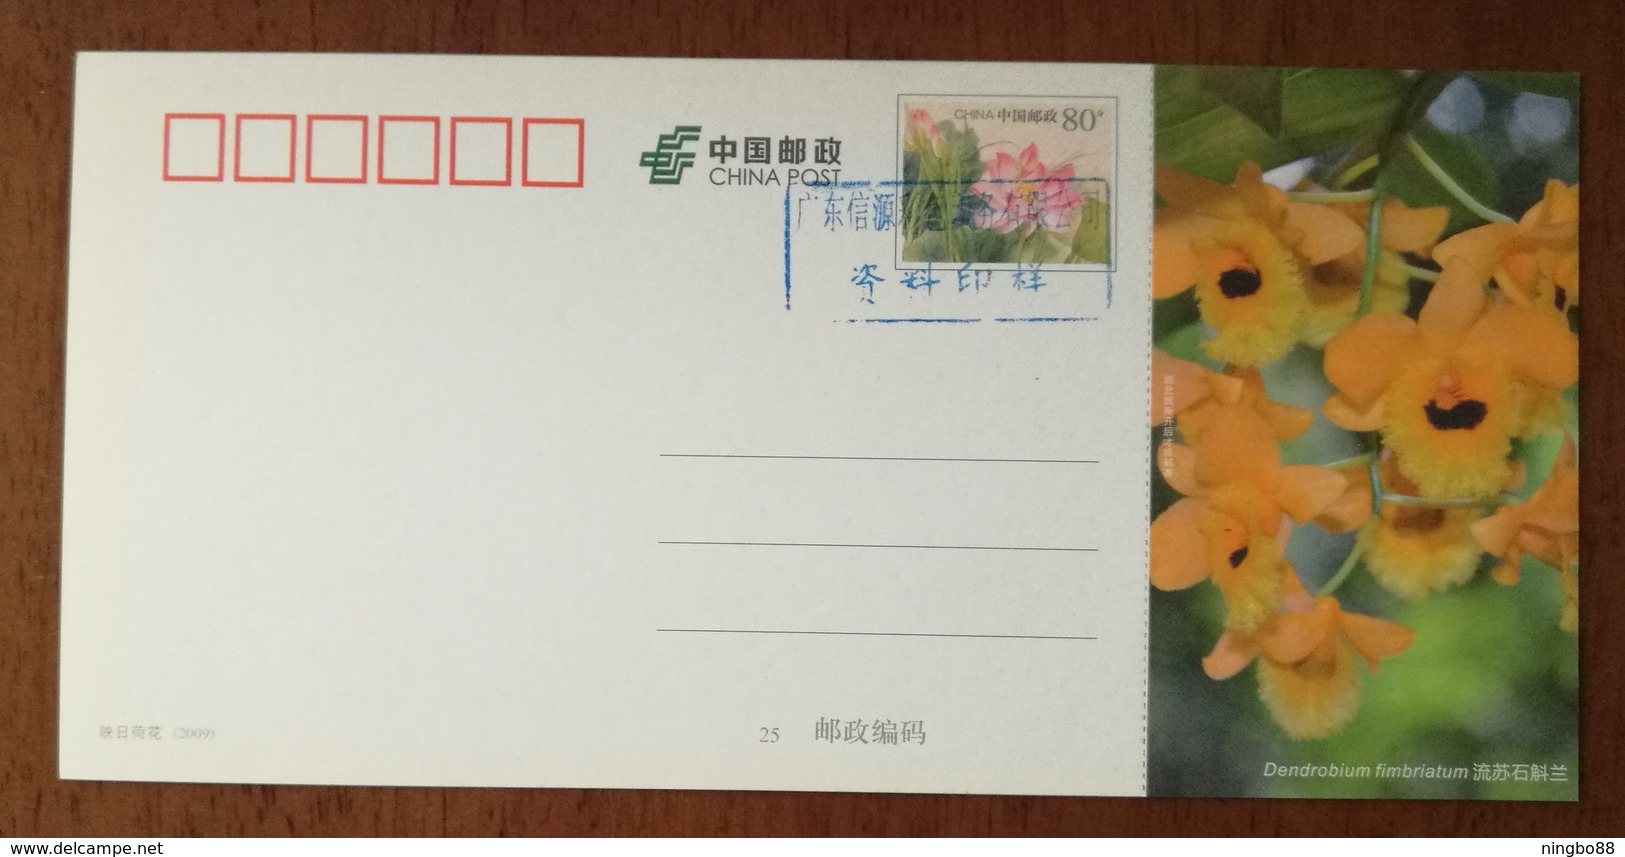 Dendrobium Fimbriatum Hook.,China 2013 Magical Xishuangbanna Wild Orchid Advertising Pre-stamped Card,specimen Overprint - Orchids